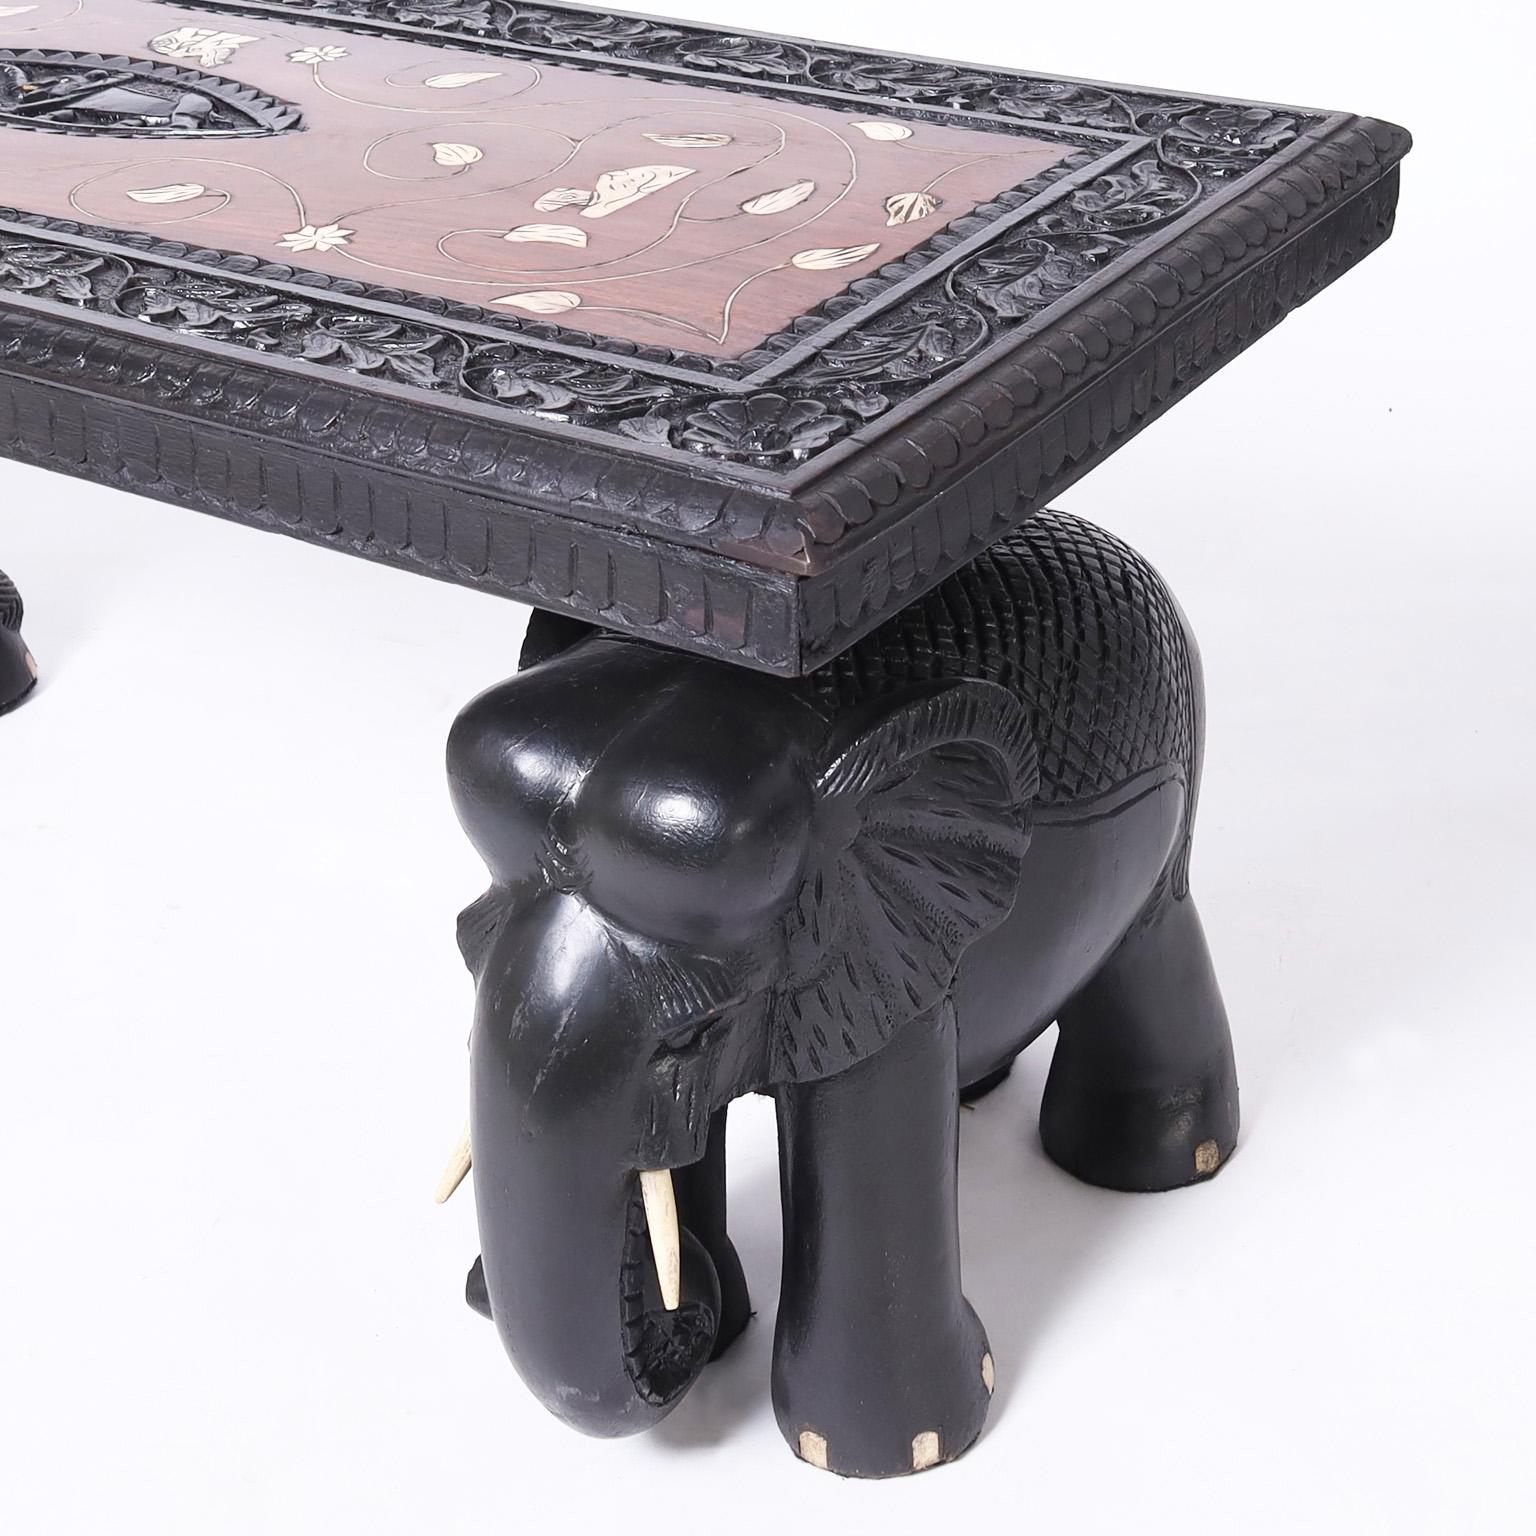 Pair of Antique Anglo Indian Inlaid Tables with Elephants For Sale 2